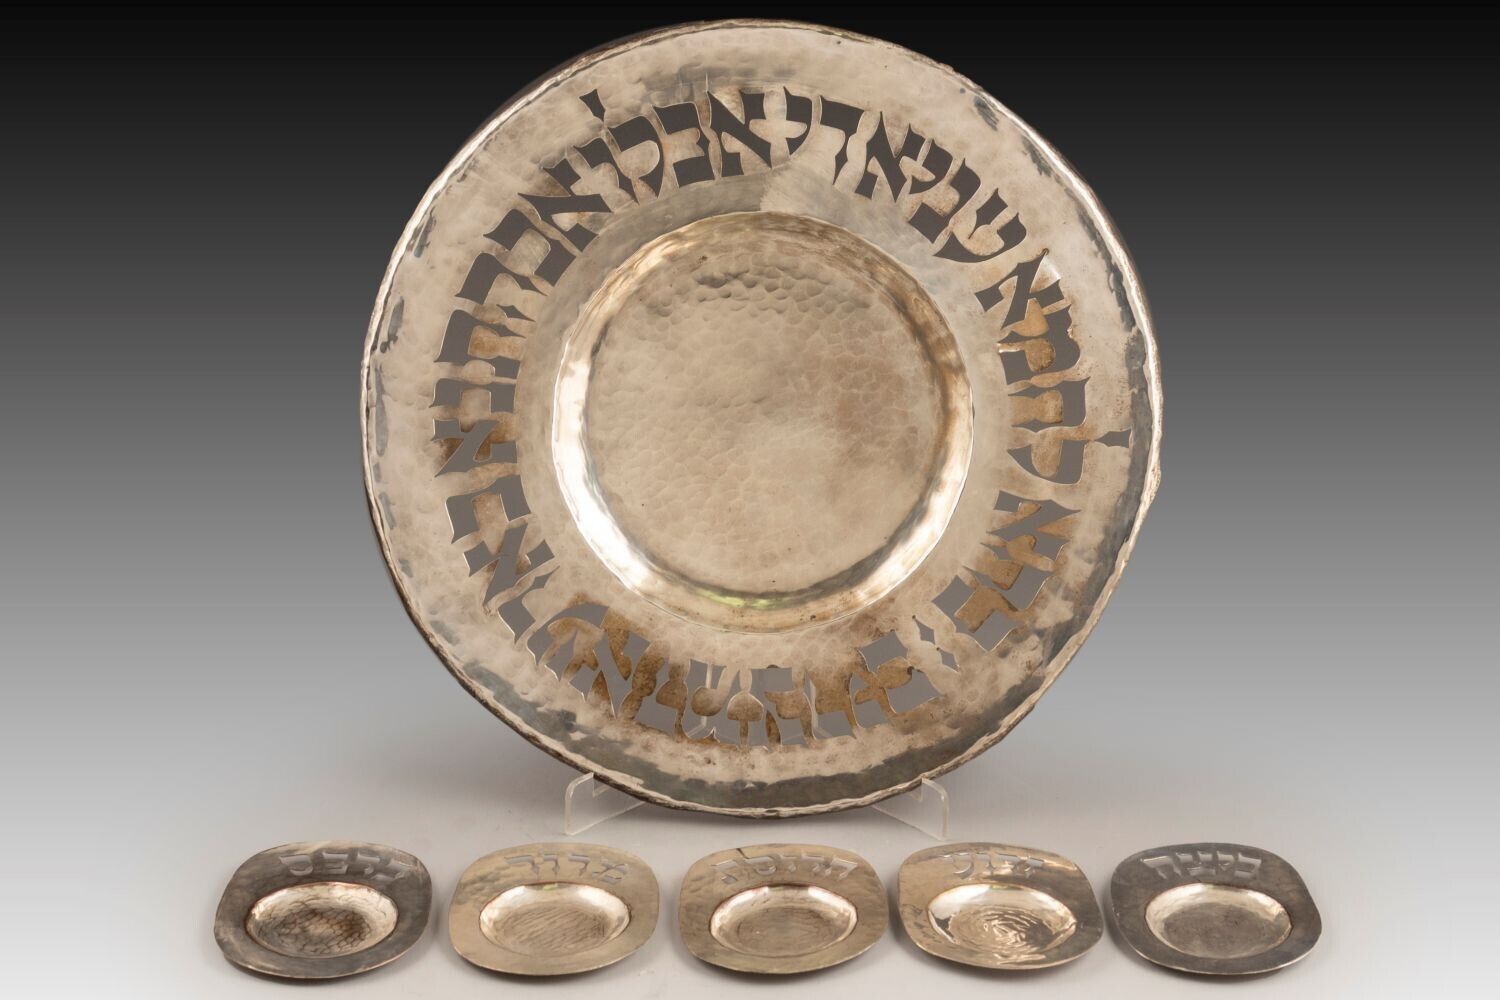 Judaica Silver-Plated Passover Plate, Hans Ettlinger (Hey Yod Aleph)